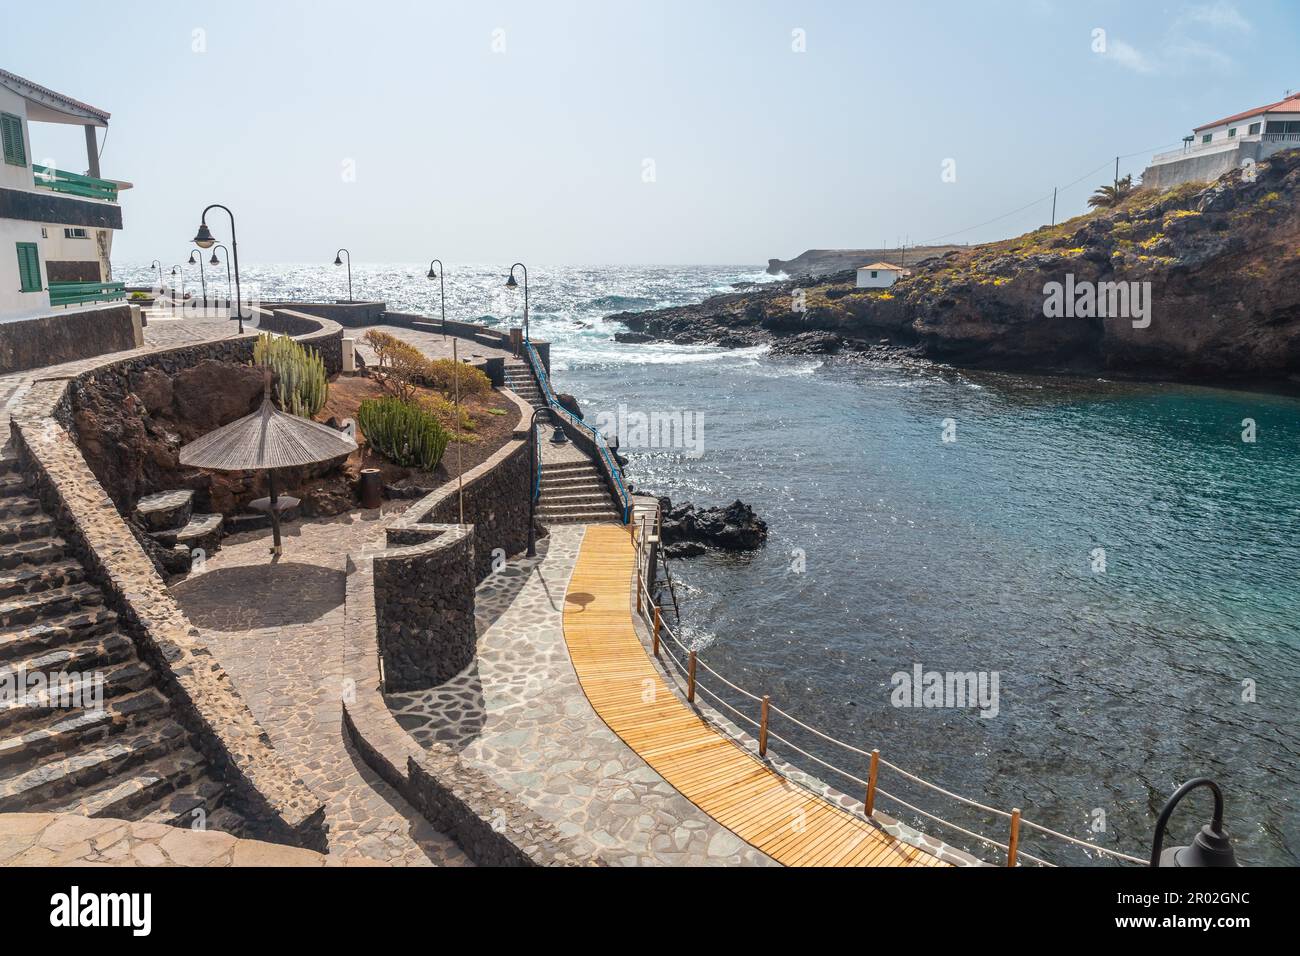 Recreational area of the town of Tamaduste located on the coast of the island of El Hierro in the Canary Islands, Spain Stock Photo